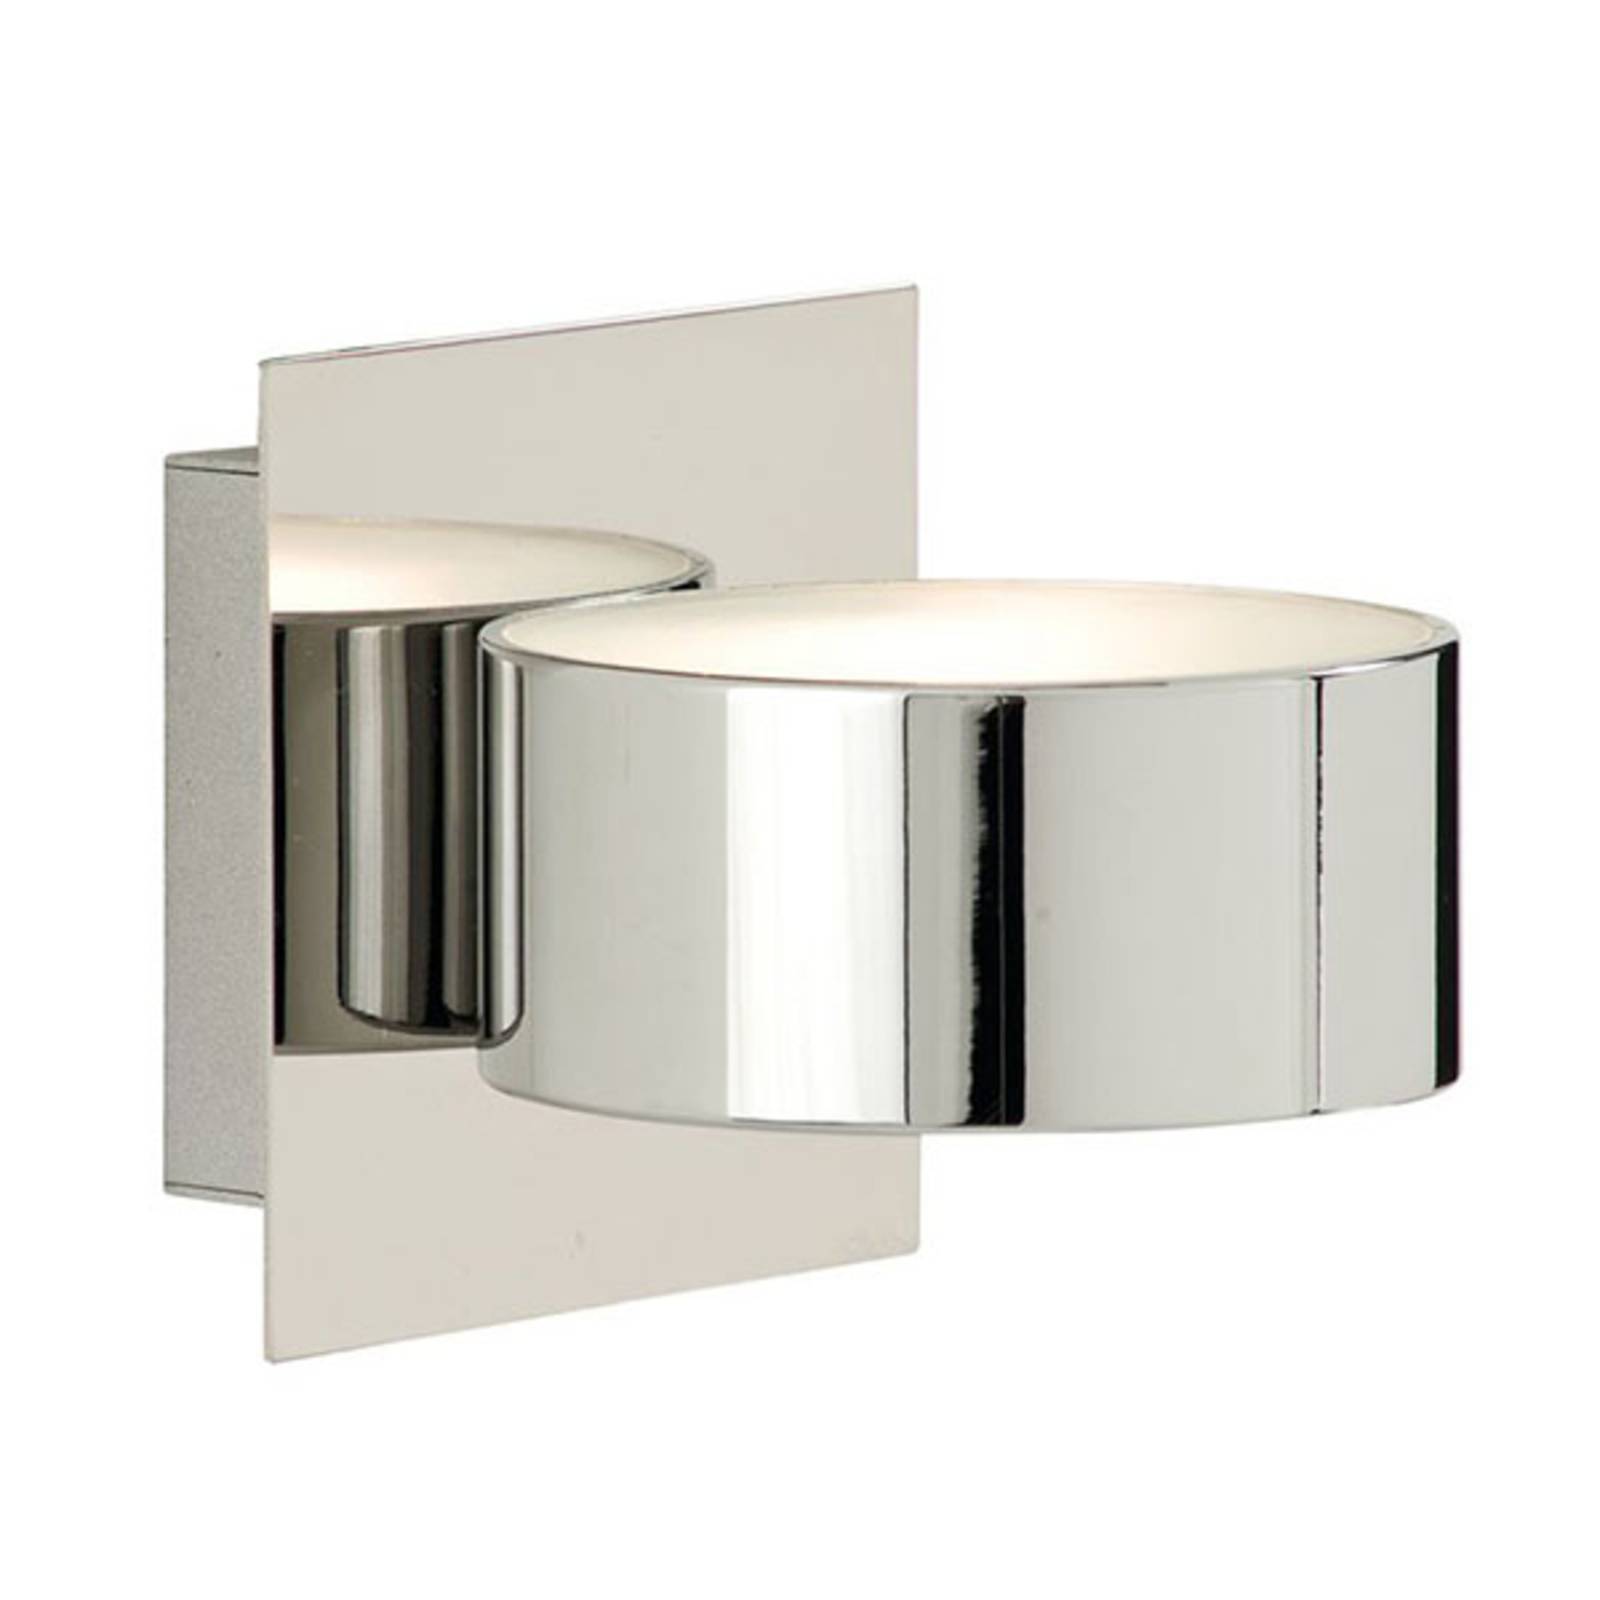 Wall 2691 wall light in chrome with glass diffuser